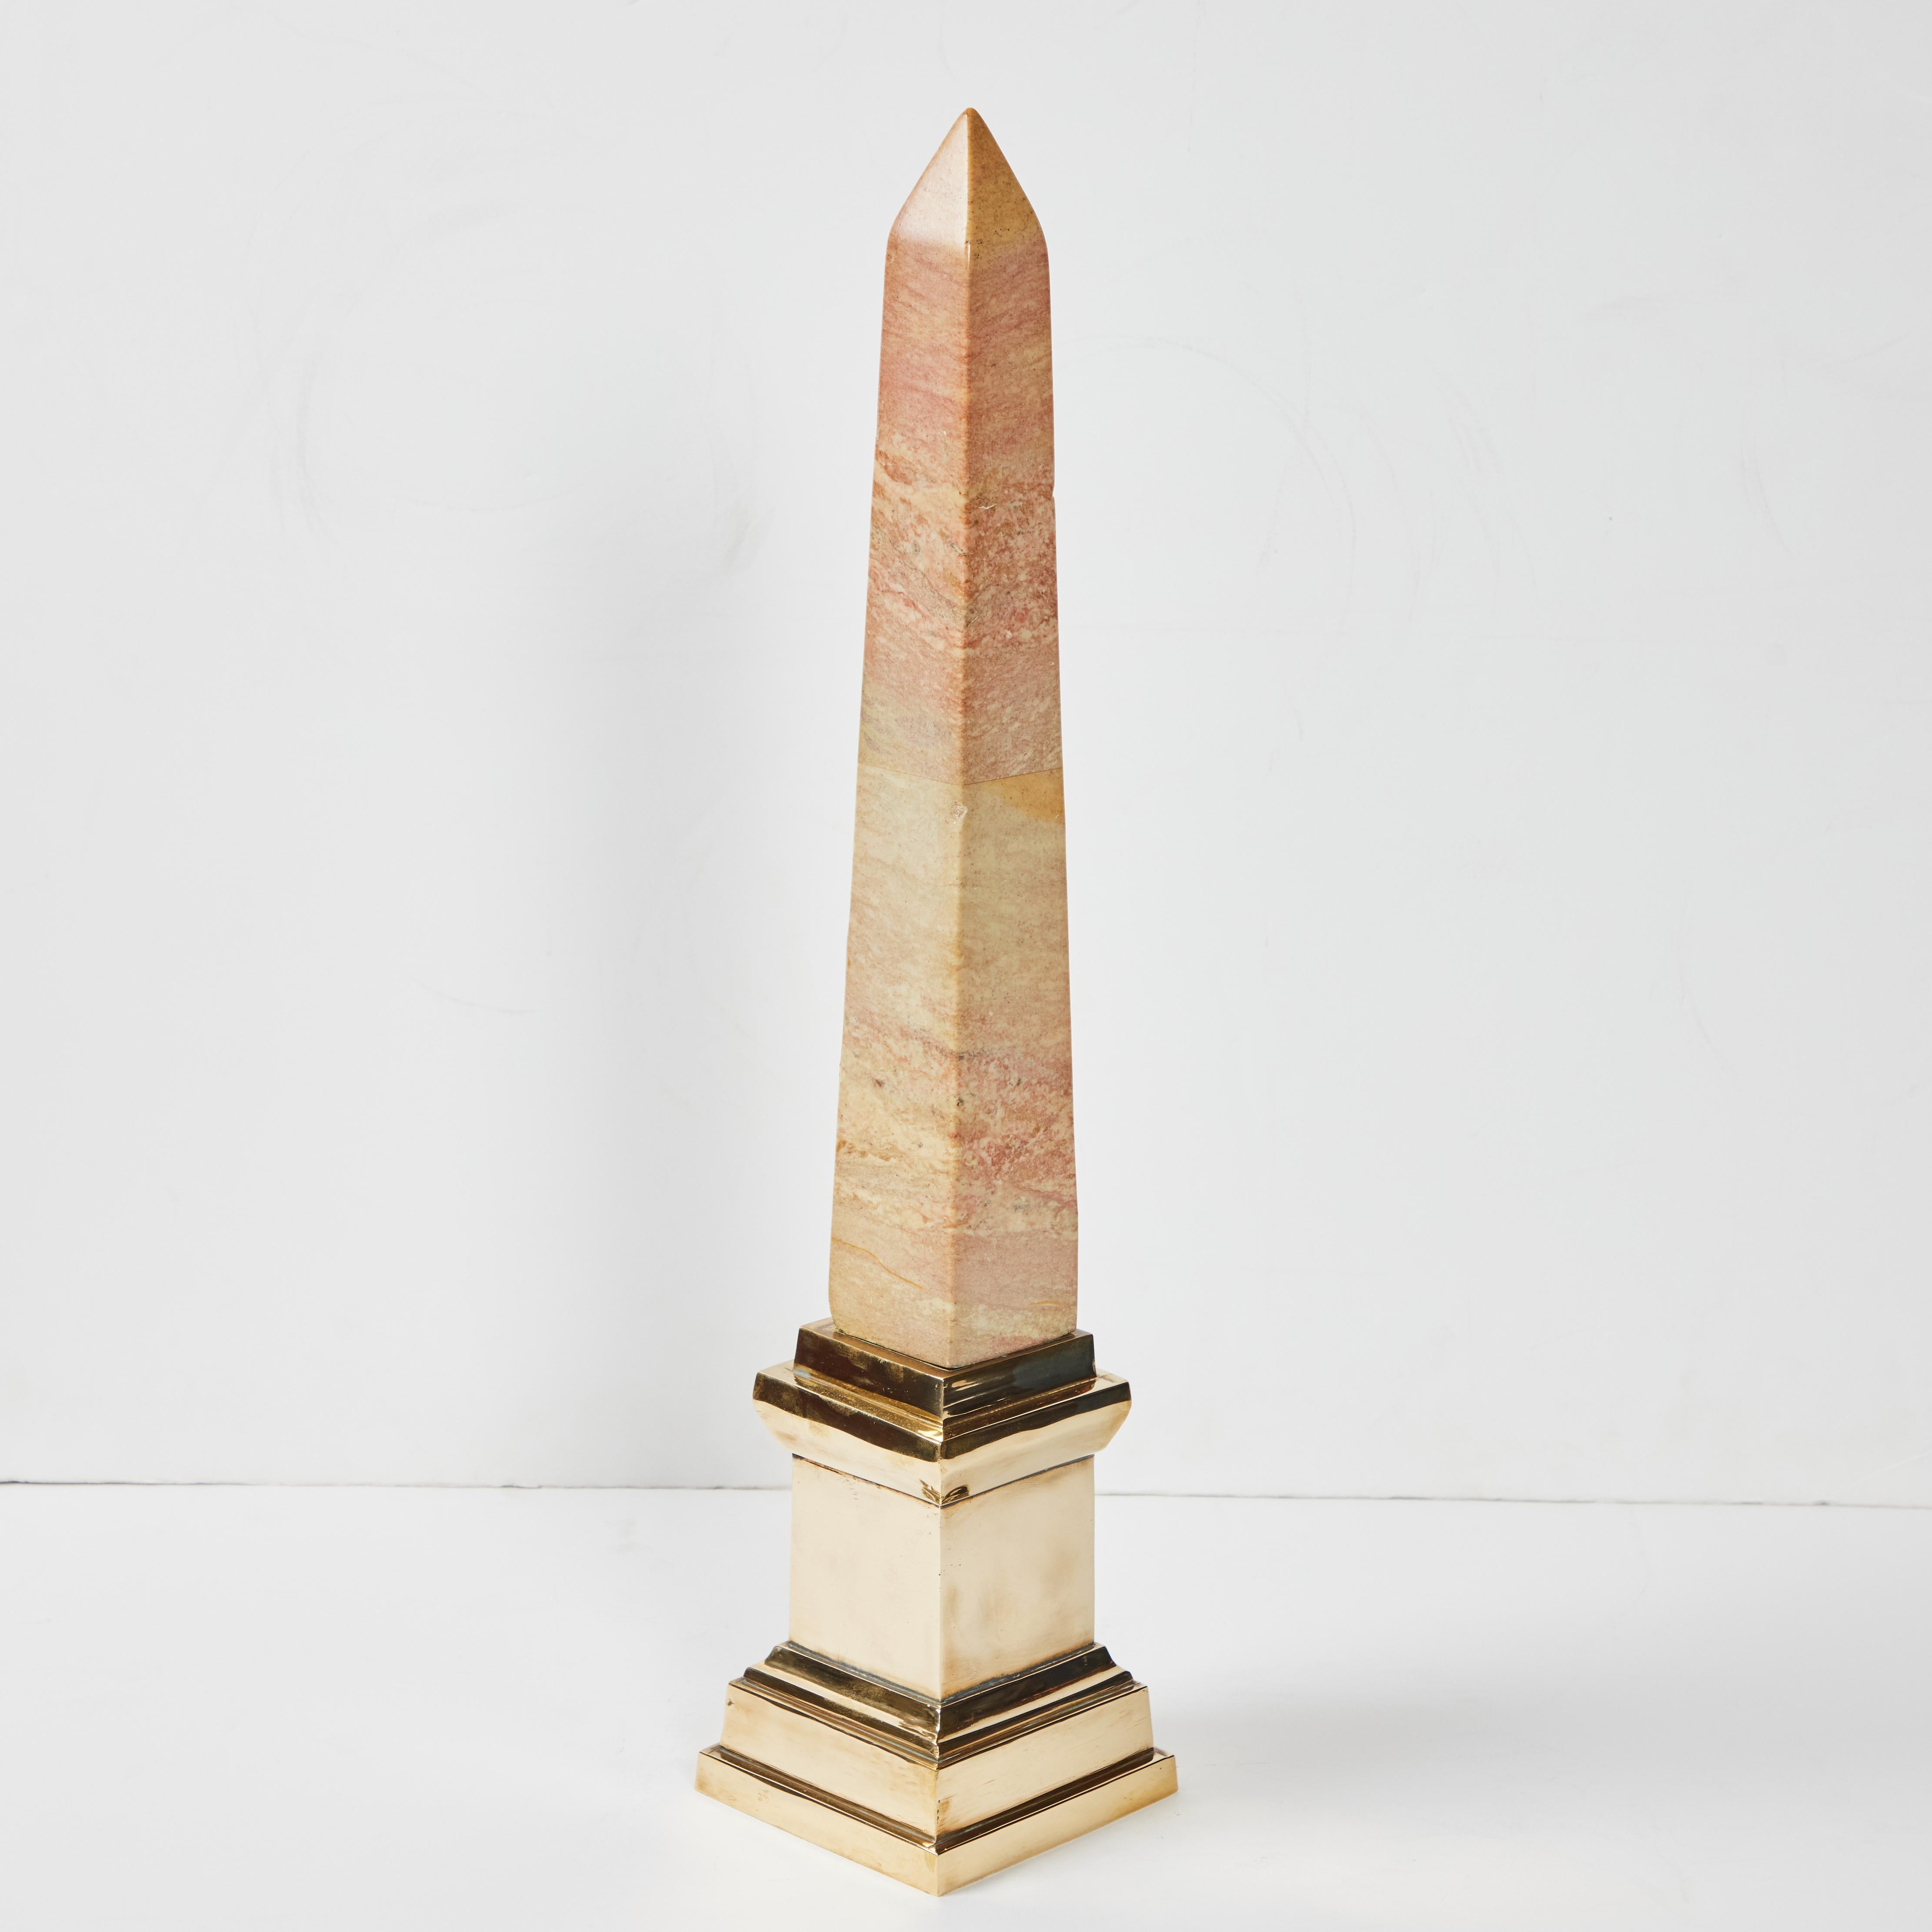 A hand carved and polished marble obelisk in pastel tones on a polished brass base.  